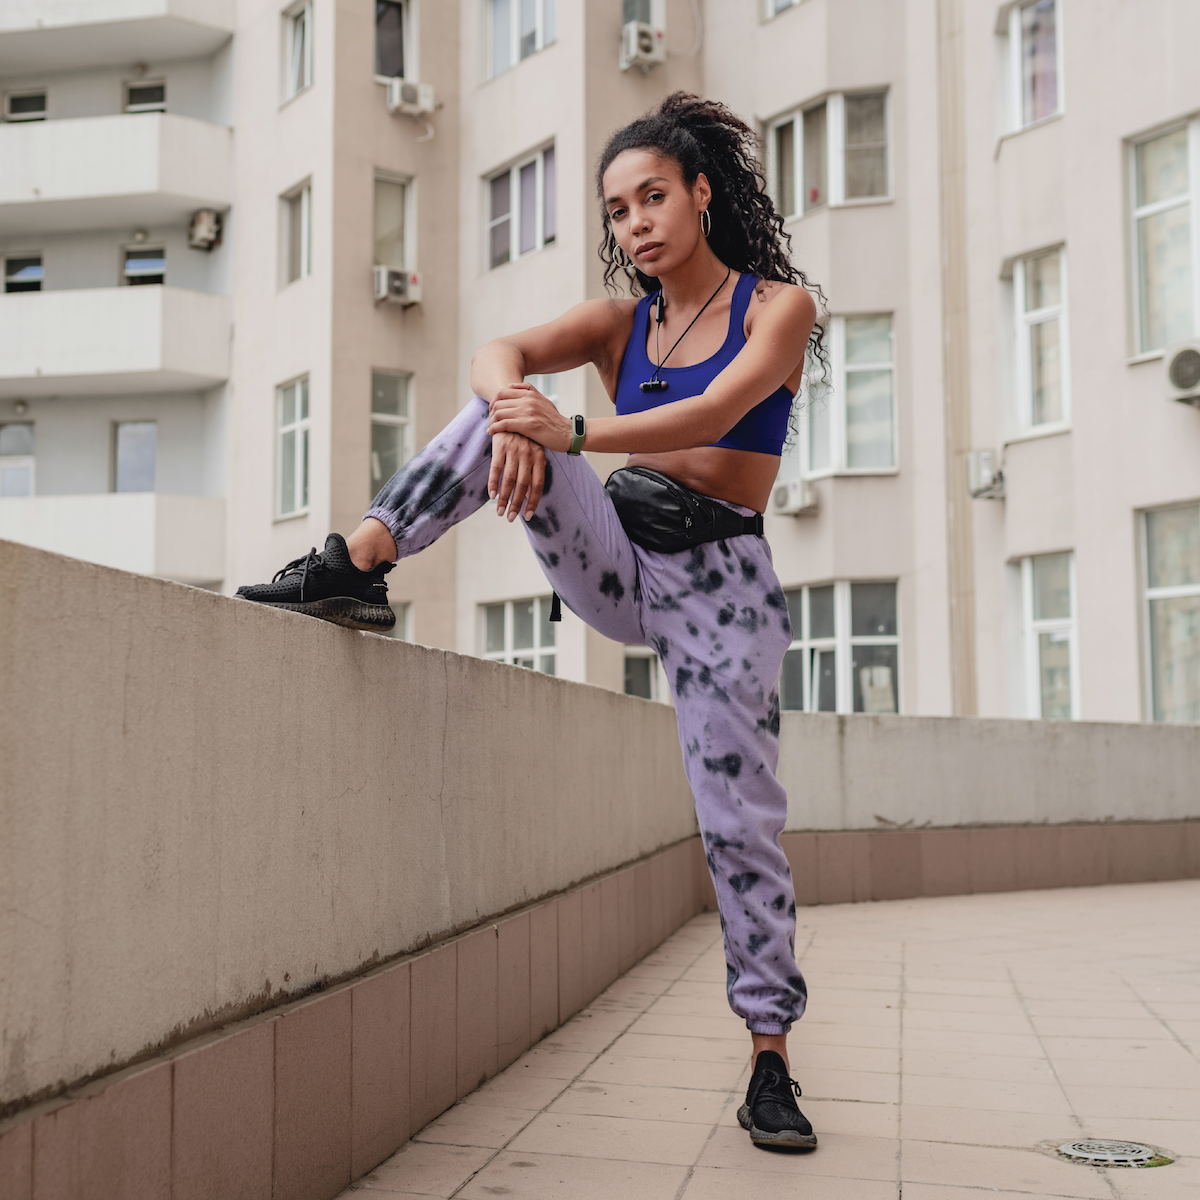 A young woman in tie dye joggers practicing HRV techniques while leaning against a wall.